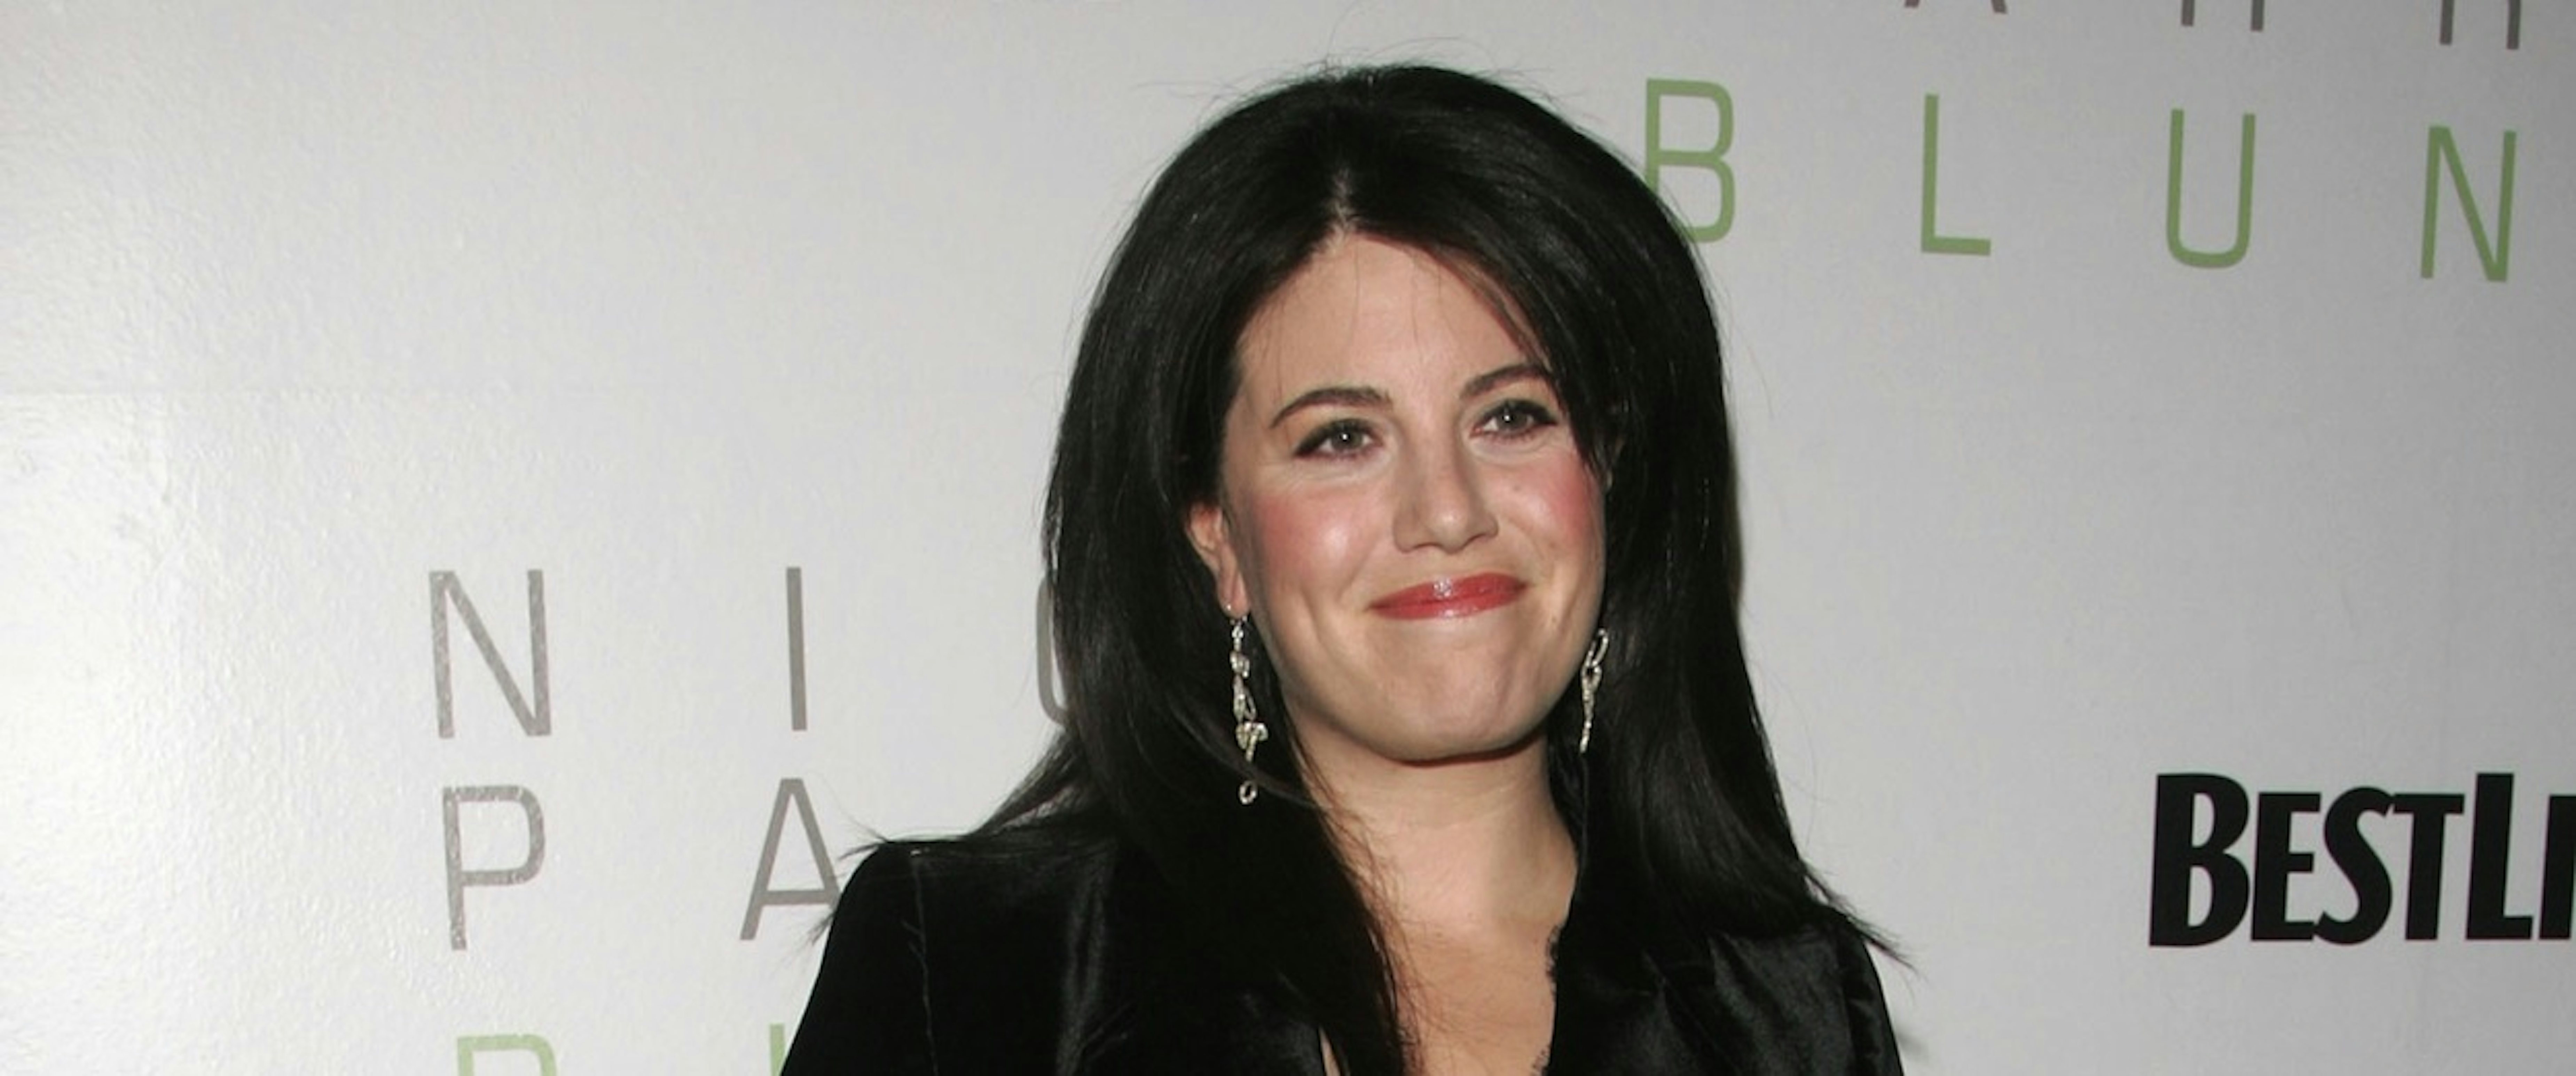 Monica Lewinsky Joins Twitter to Fight Cyber-Bullying, Gets Bullied